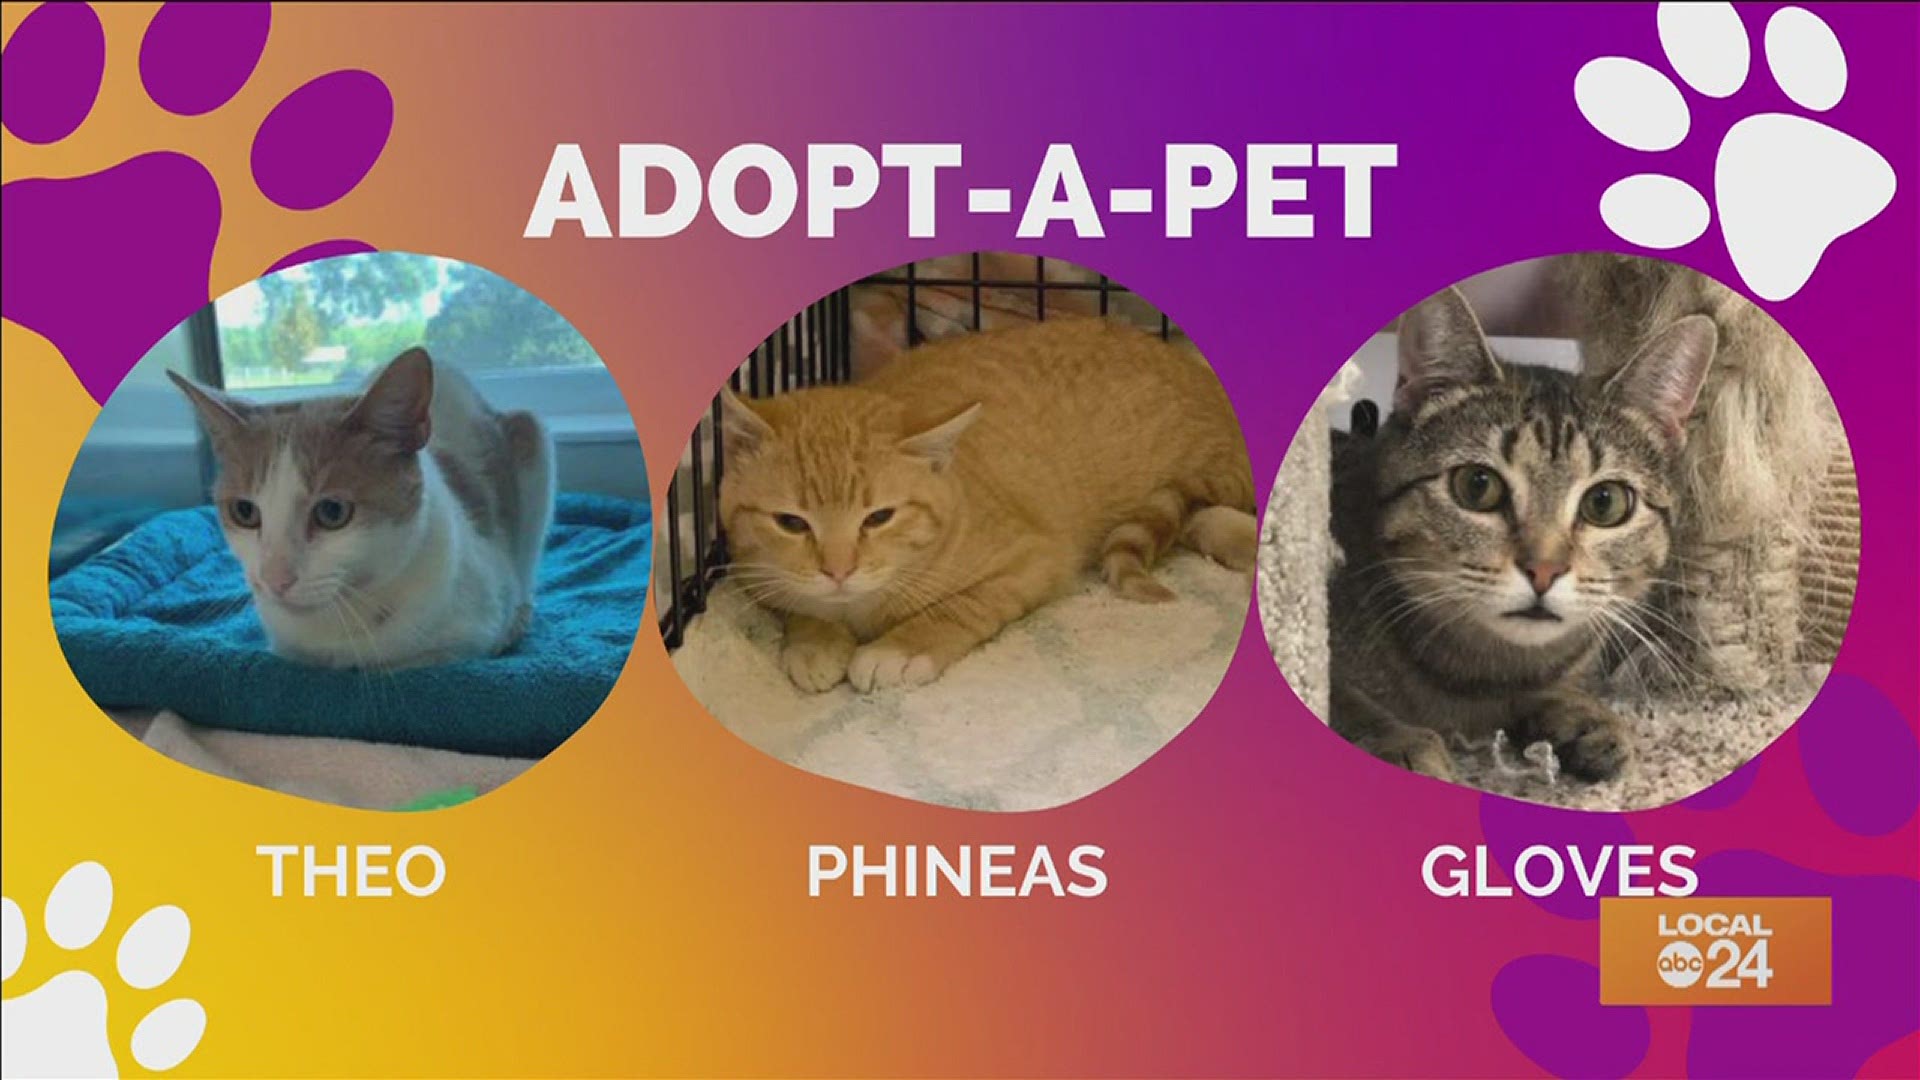 Love cats? Check out what the Memphis Humane Society has to offer for Adopt-a-Pet Thursday! Starring Sydney Neely on "The Shortcut!"